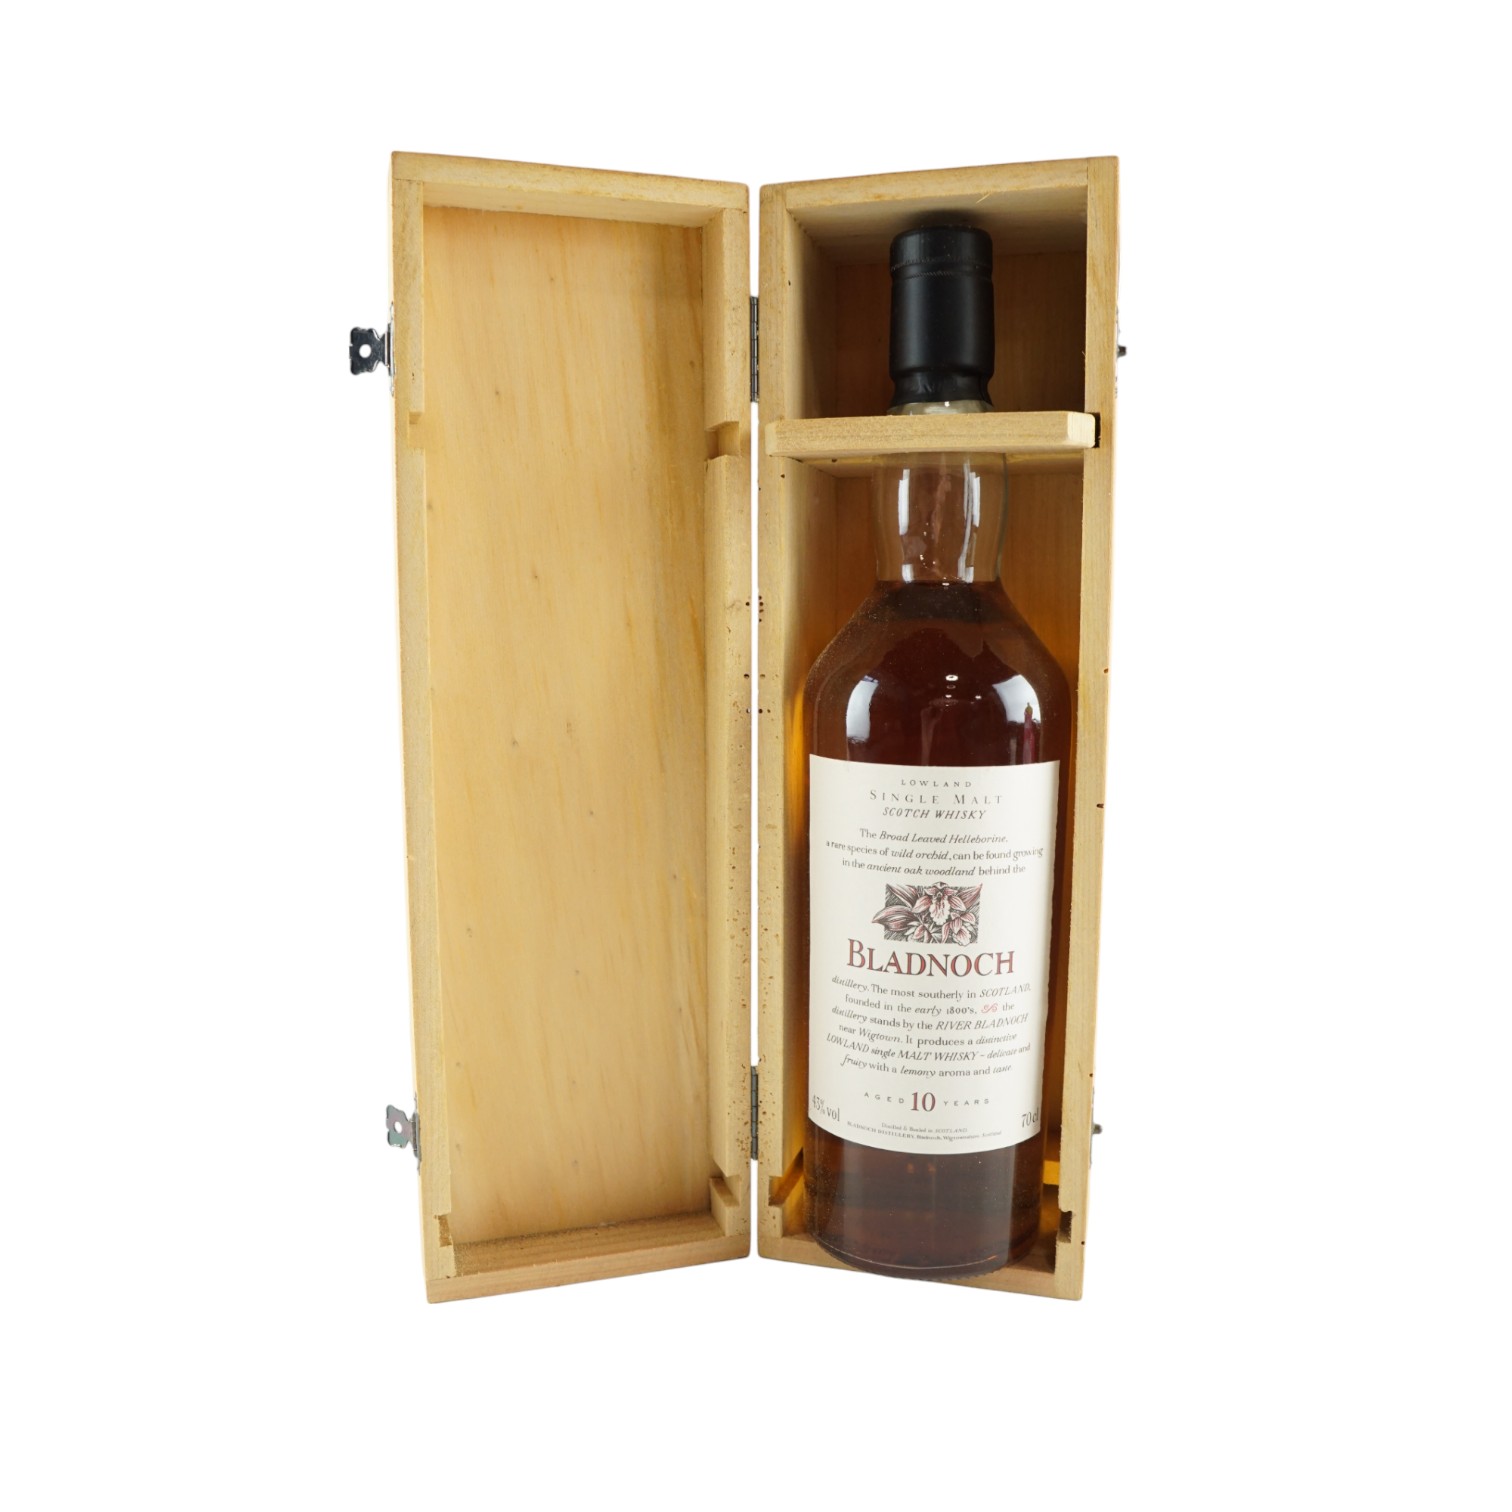 A bottle of Bladnoch 10 year old Lowland single malt Scotch whisky, in original wooden box, 70 cl - Image 3 of 3